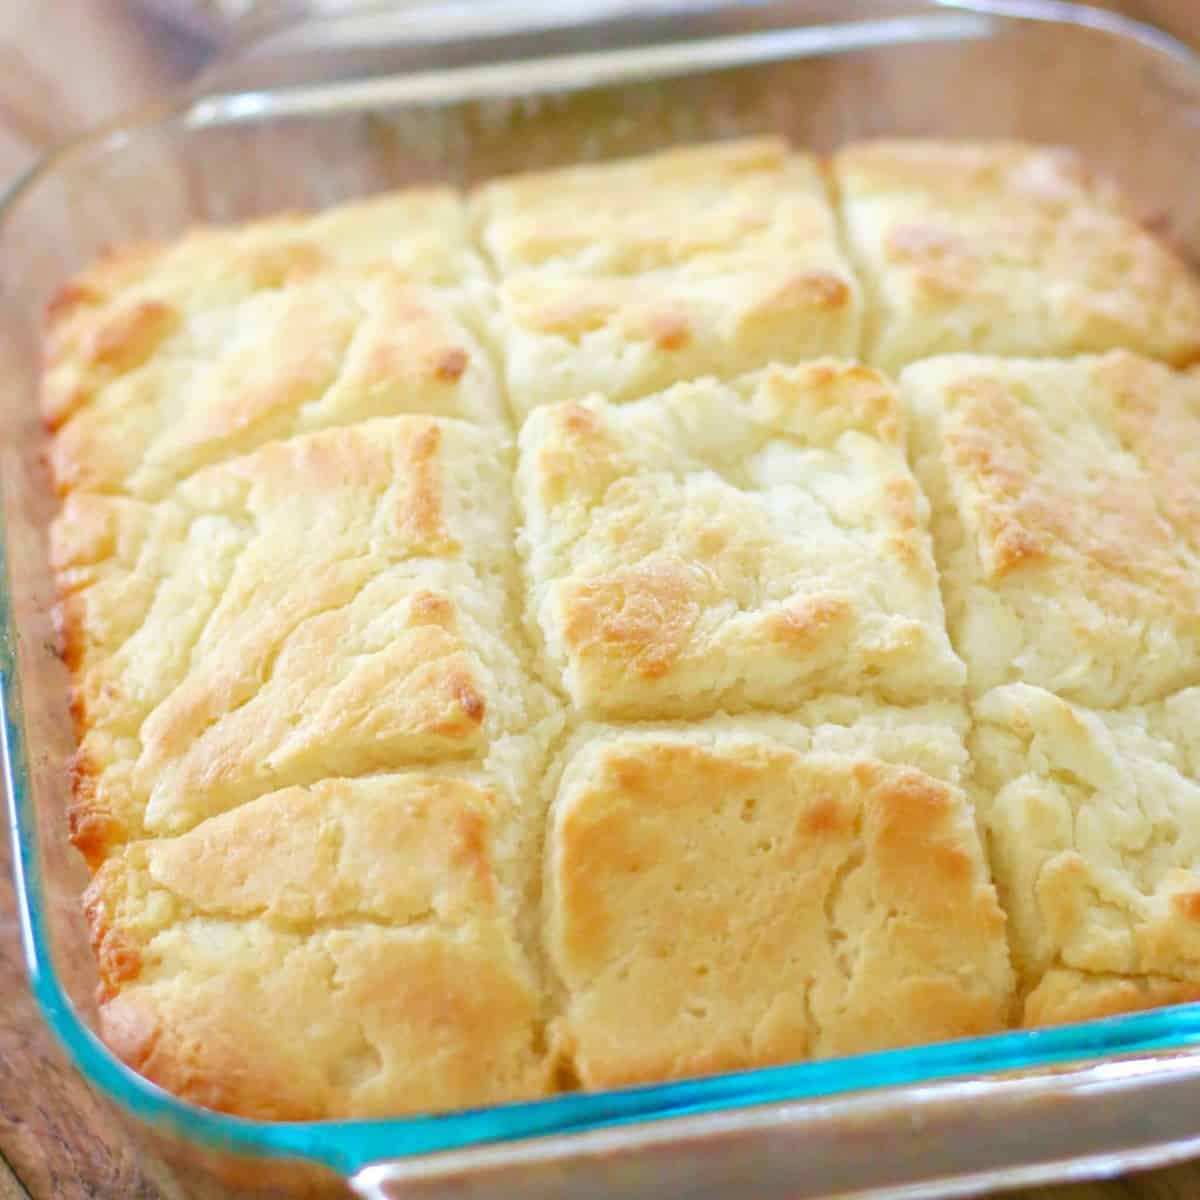 Easy Butter Dip Buttermilk Biscuits recipe - biscuits shown fully baked in a square baking dish.